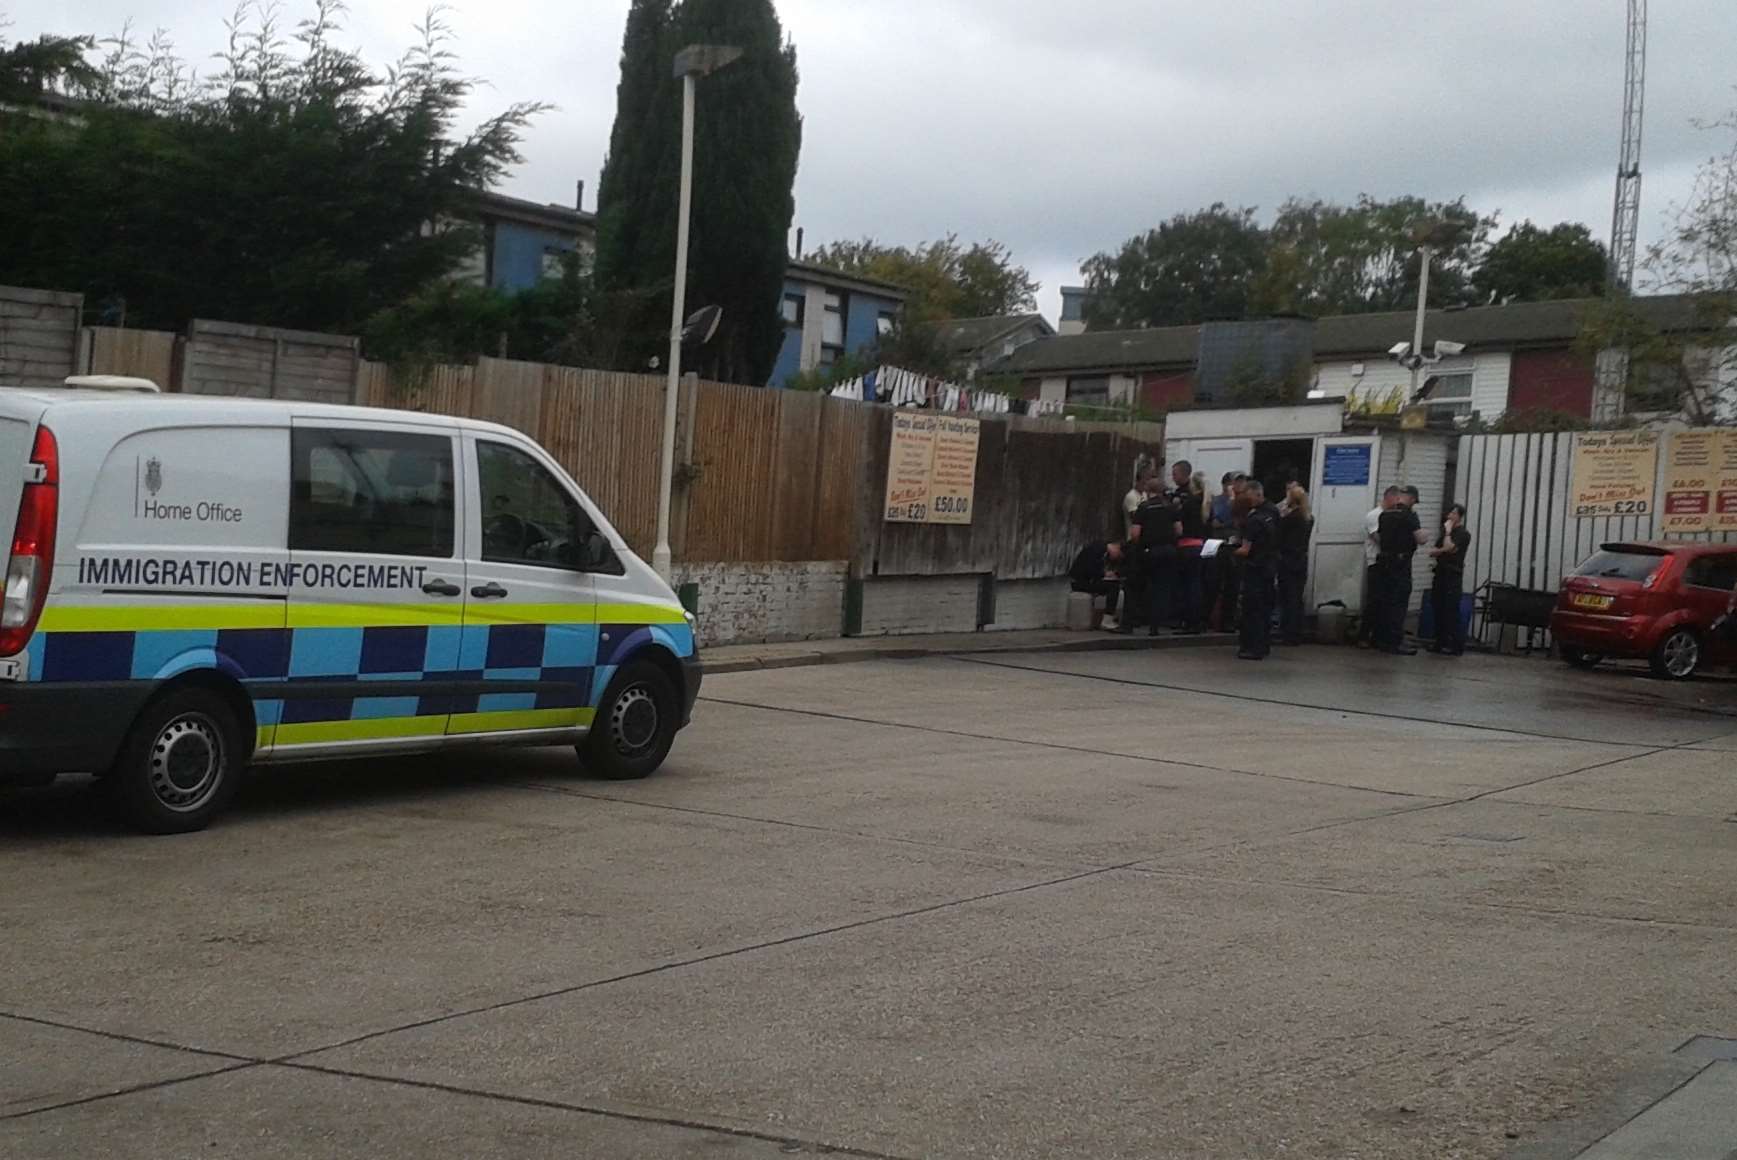 The moment when immigration enforcement raided the Sutton Road car wash. Pic: Geoff Crittenden